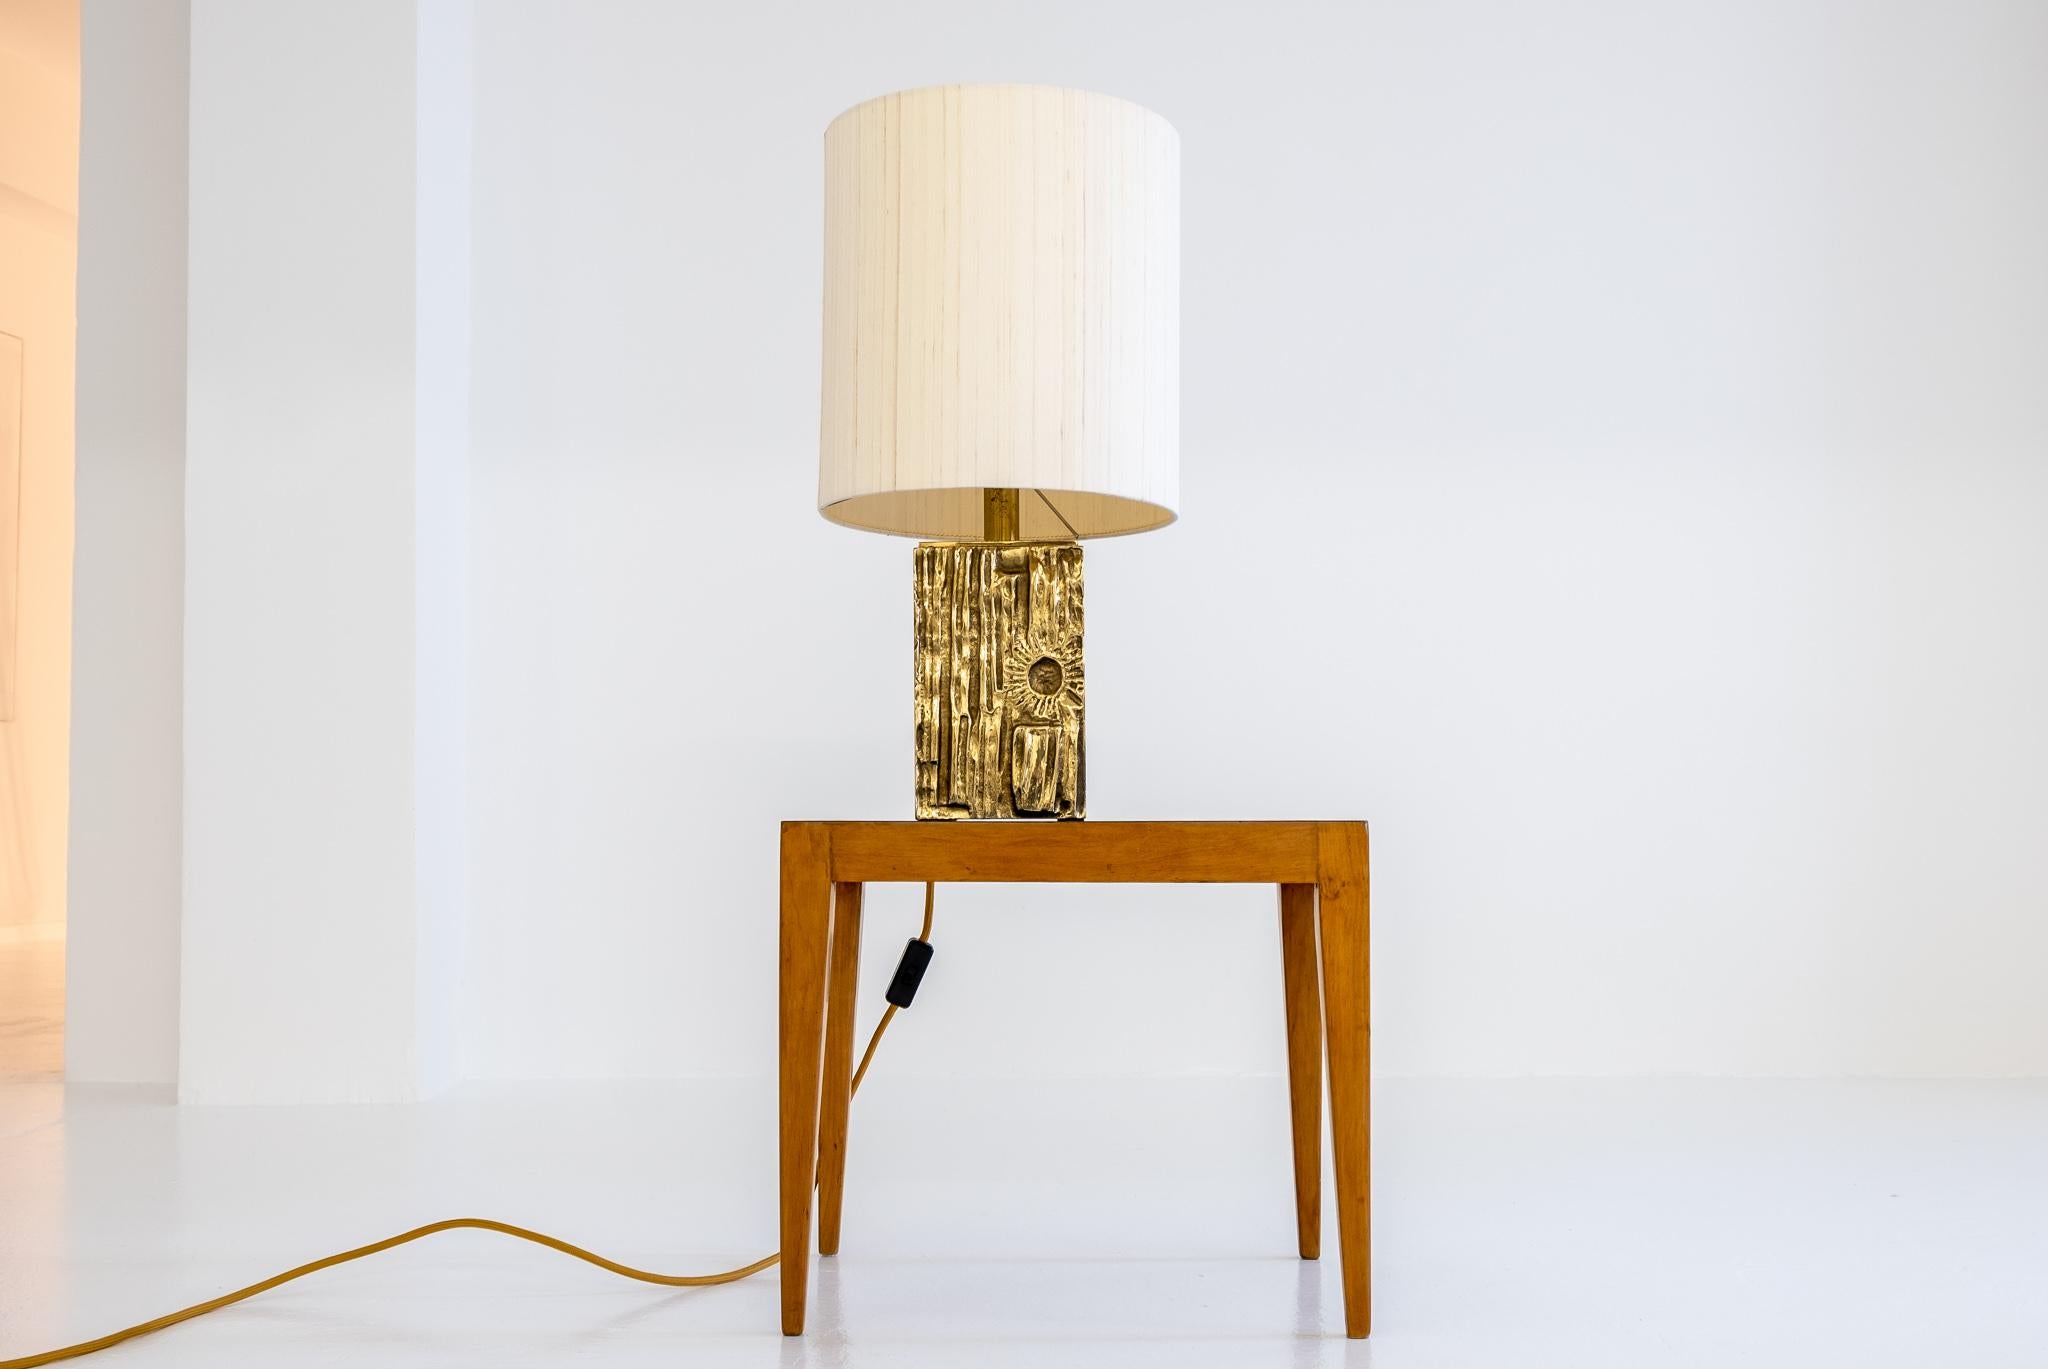 Desk lamp attributed to Luciano Frigerio by Frigerio Di Desio, Italy, circa 1970s.

Impressive and very recognizable table lamp with a sculptural, massive brass foot with cast brass plates front and back, showing a sunset behind trees in an